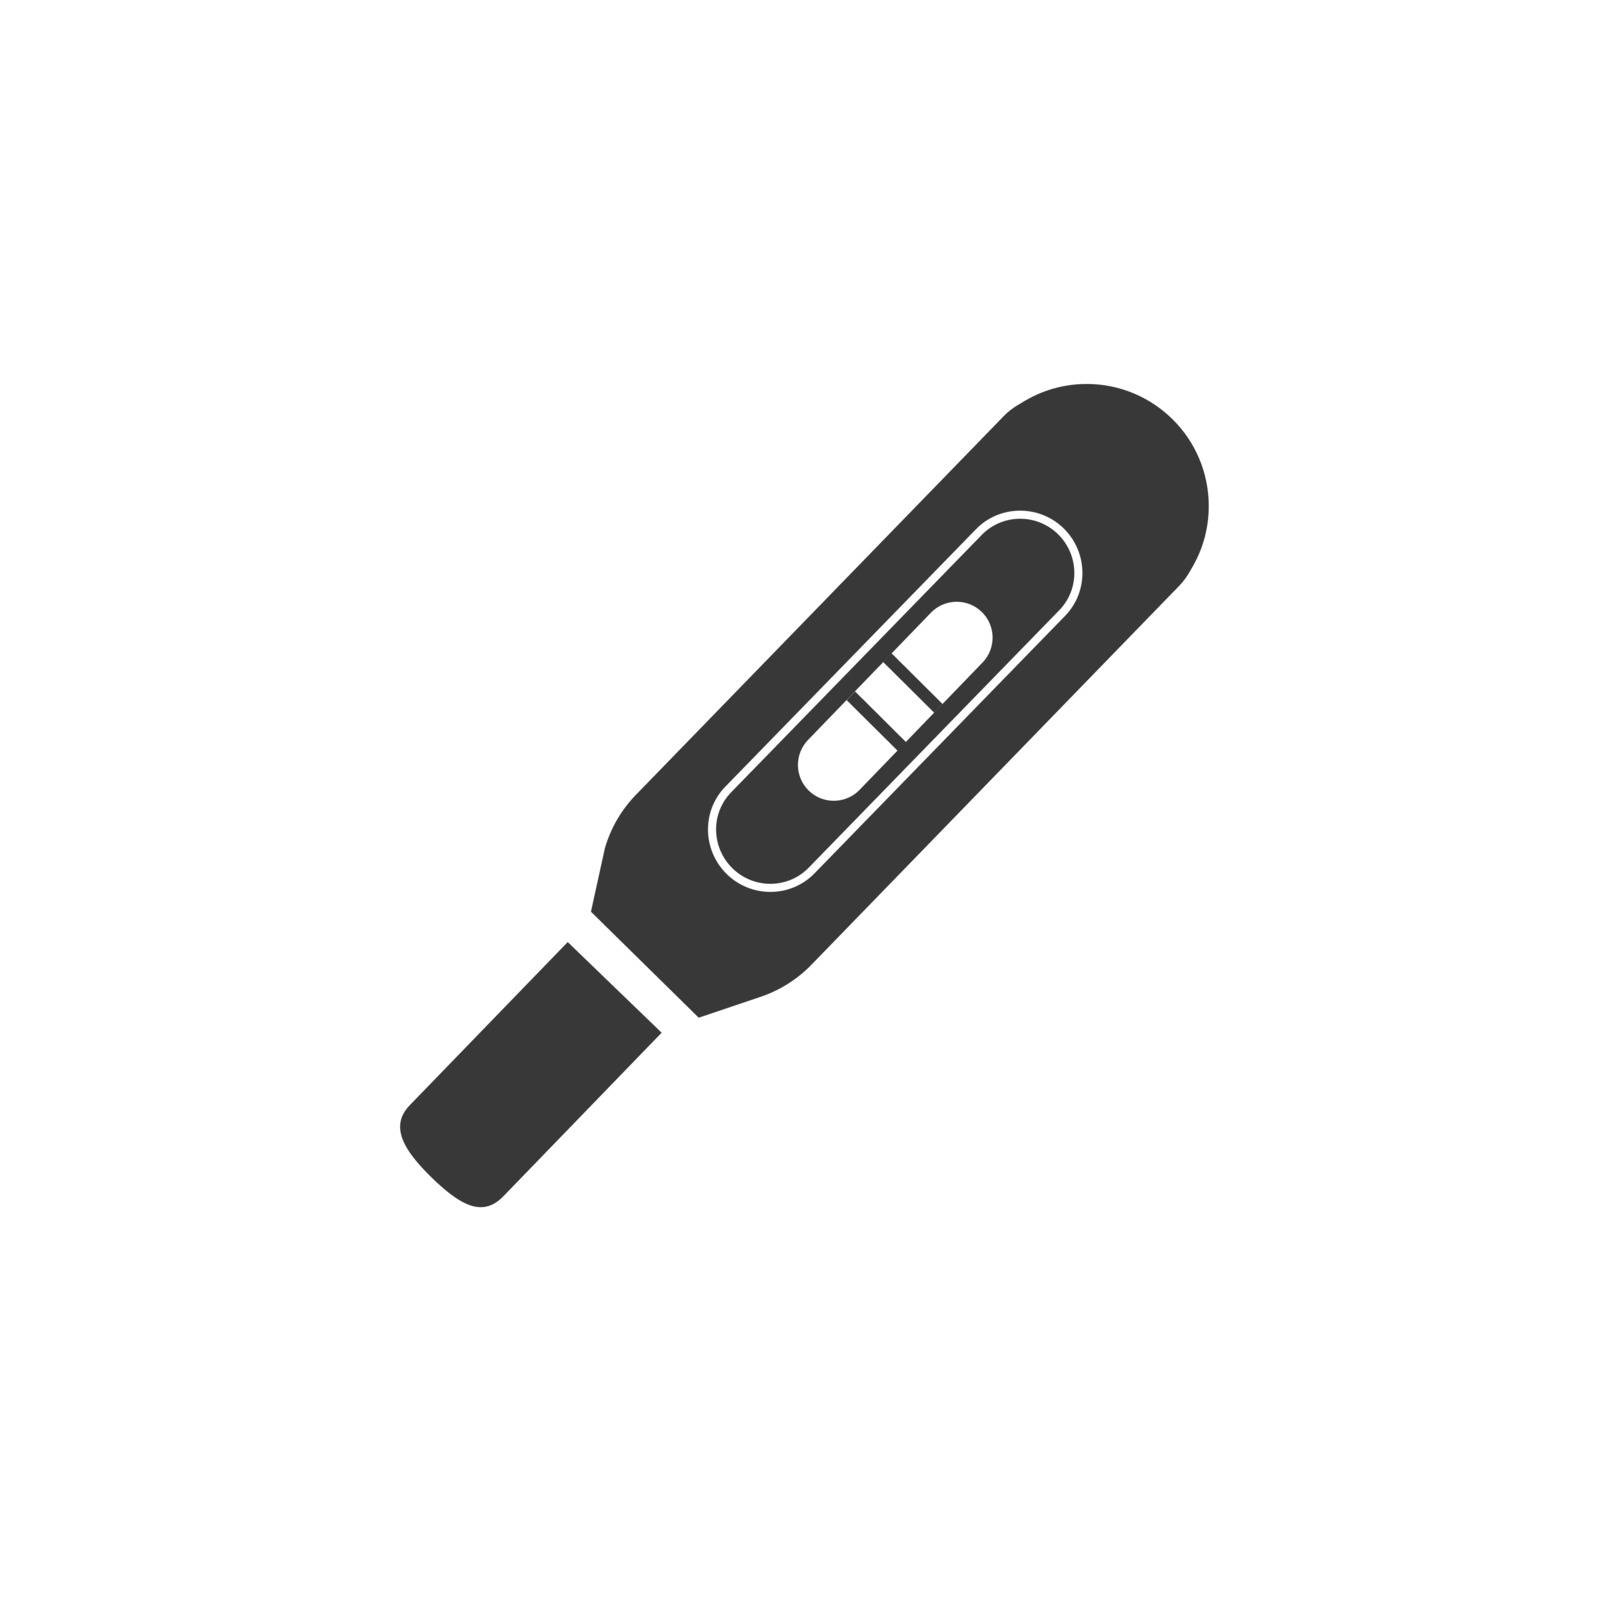 Pregnancy test icon. Isolated image. Pharmacy vector illustration by Imaagio